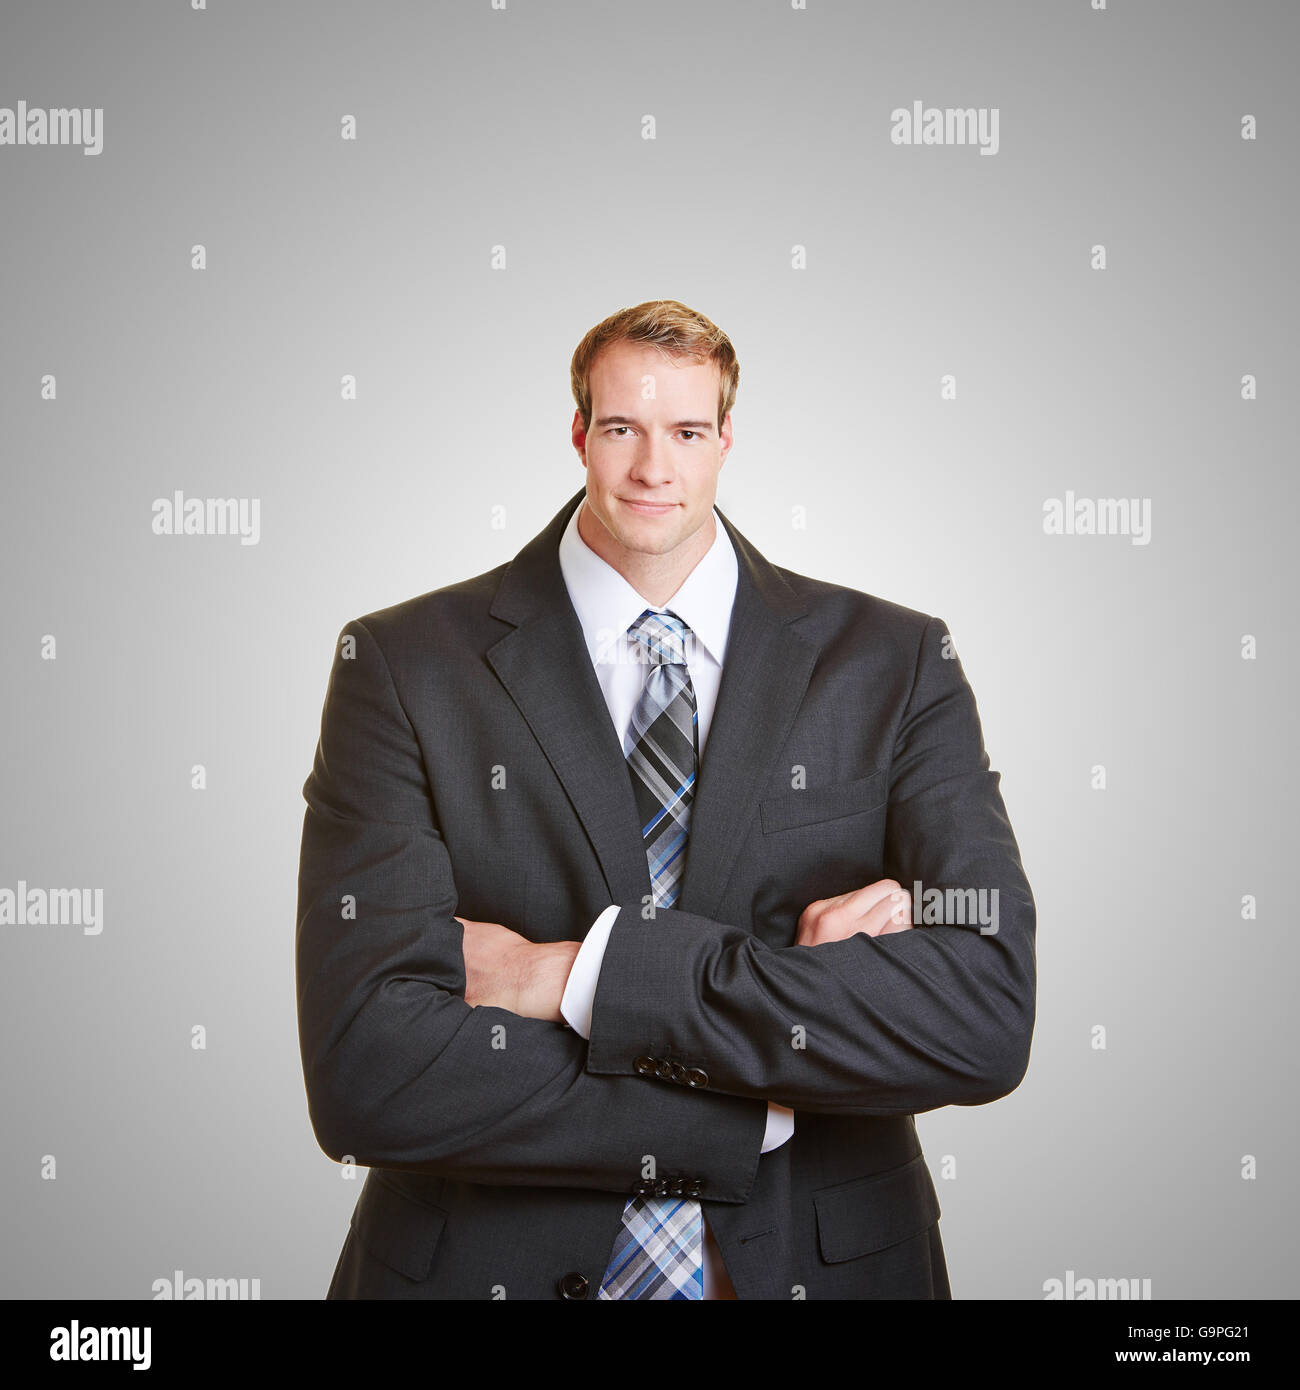 Funny business man with a small head and his arms crossed Stock Photo